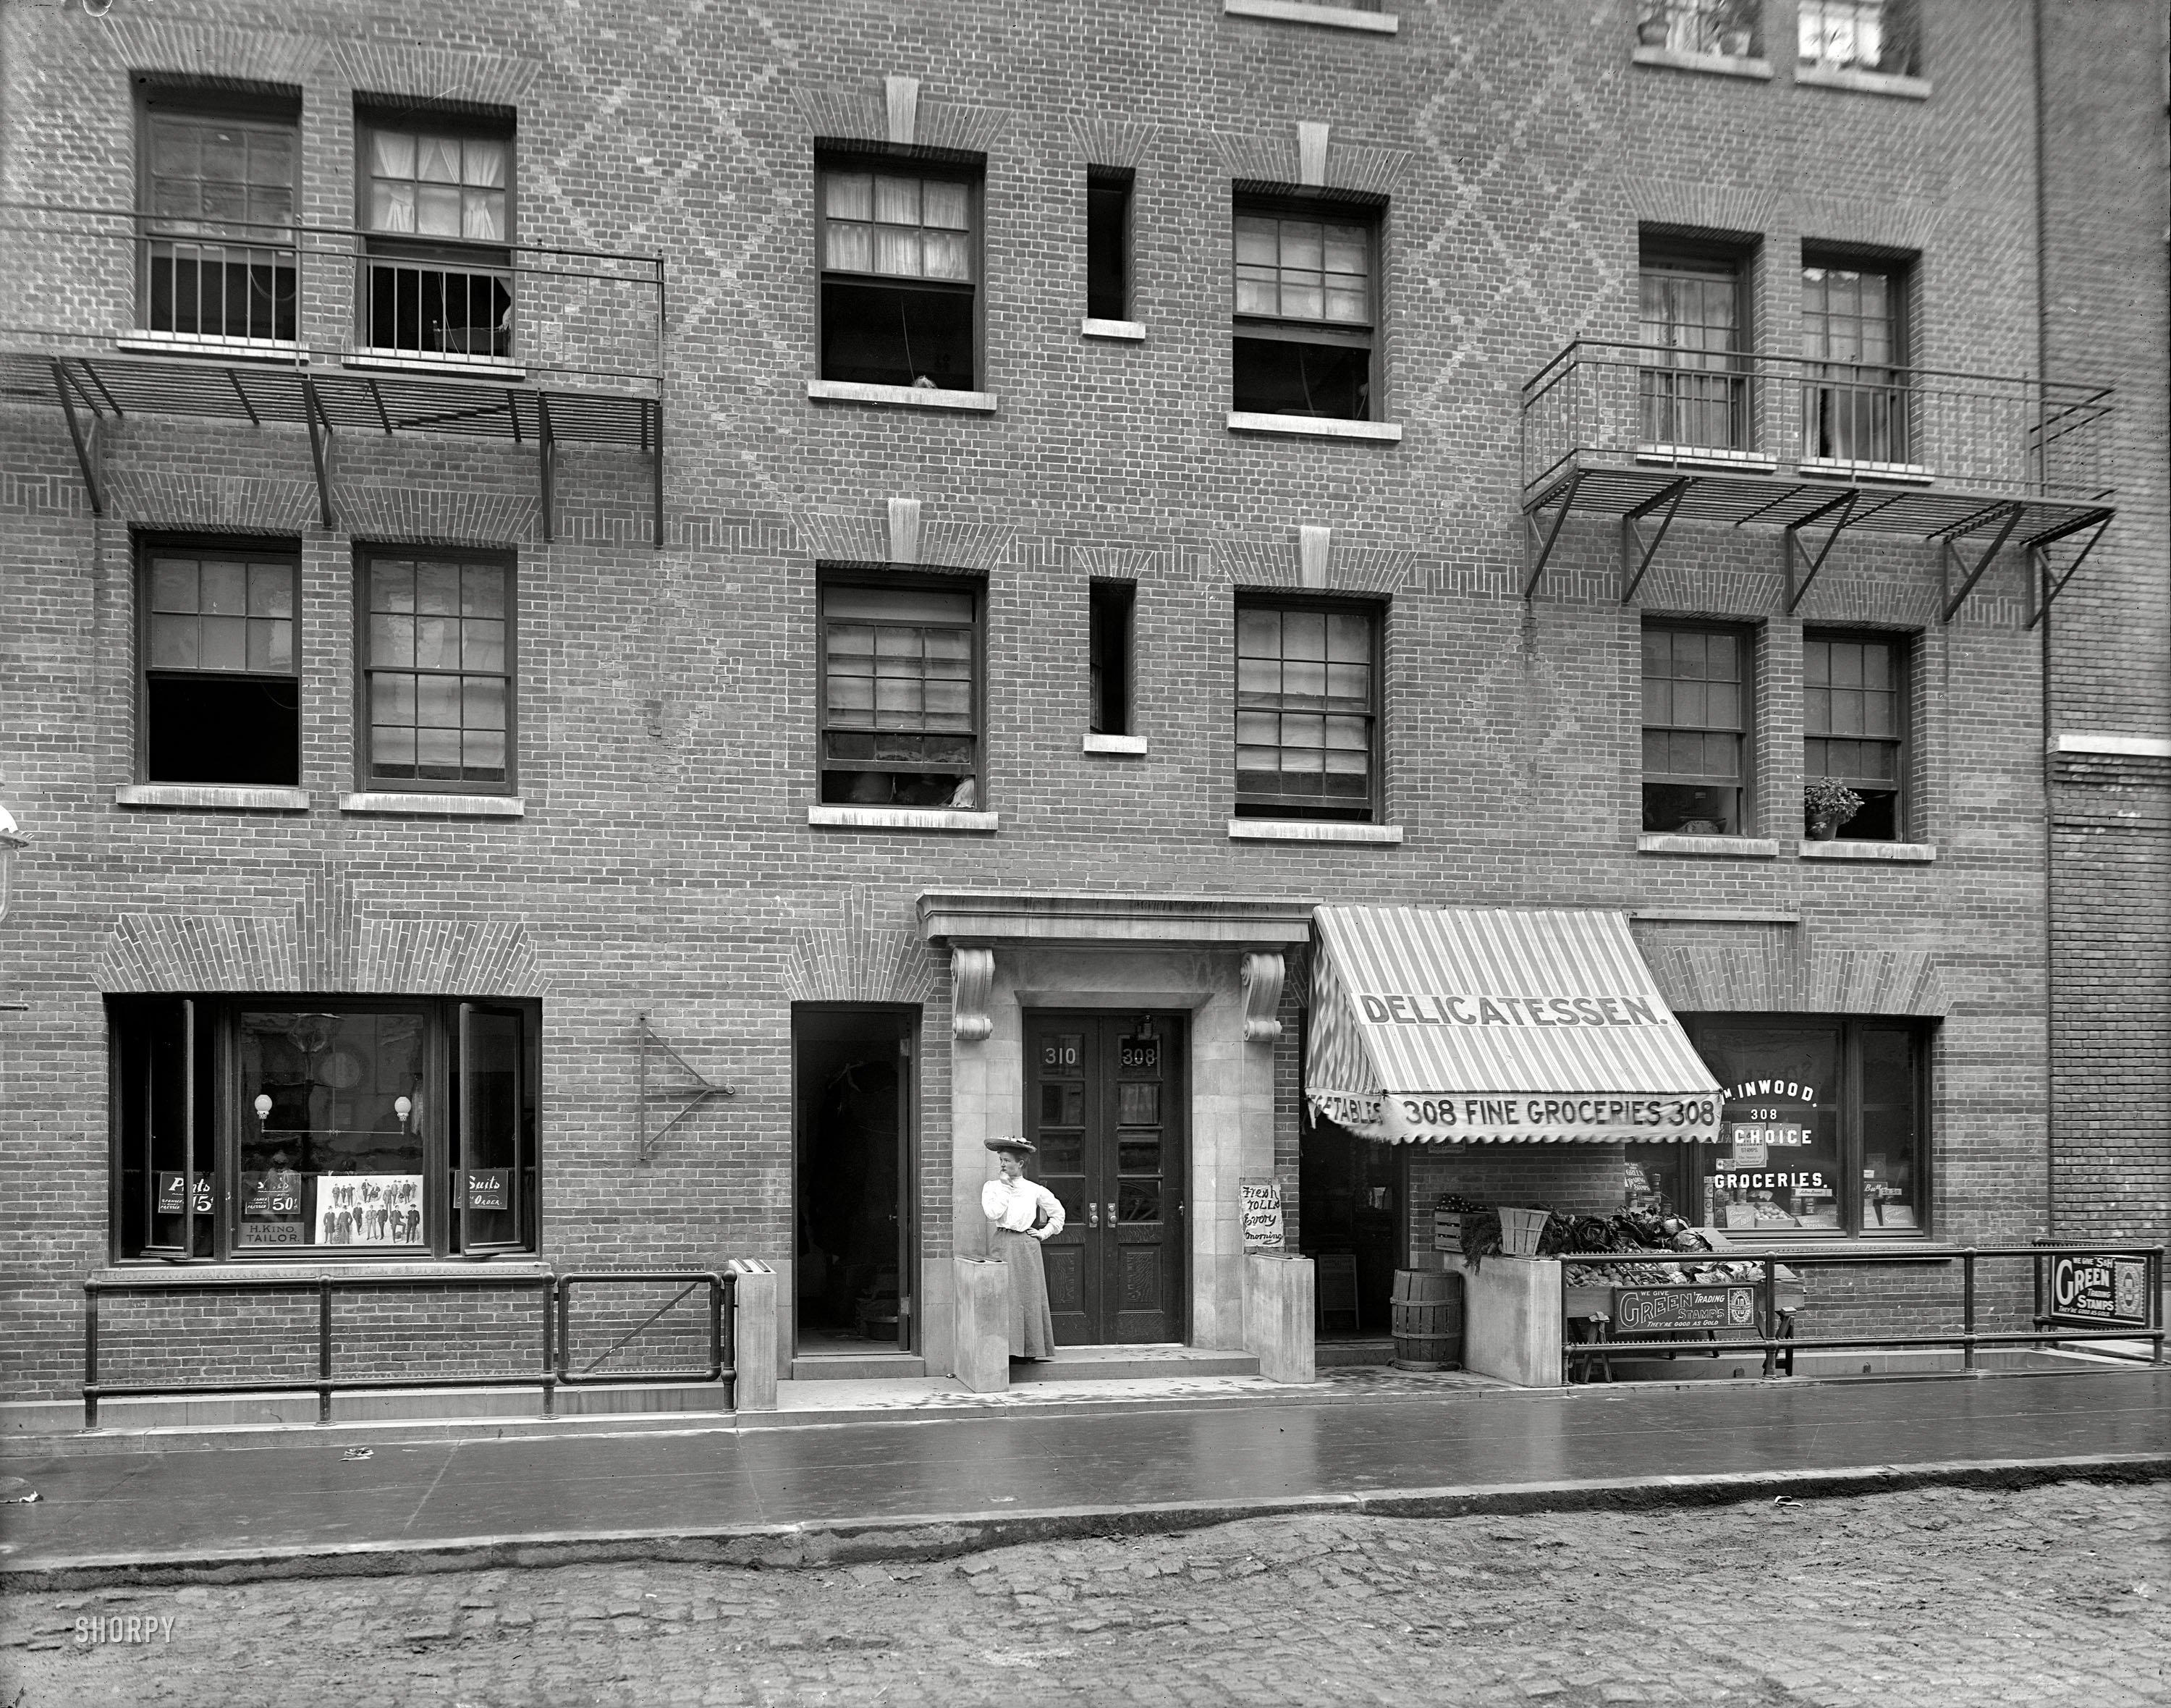 New York circa 1905. "Exterior of tenement house, E. 40th Street." Our fifth look at this building. 8x10 glass negative, Detroit Publishing Co. View full size.